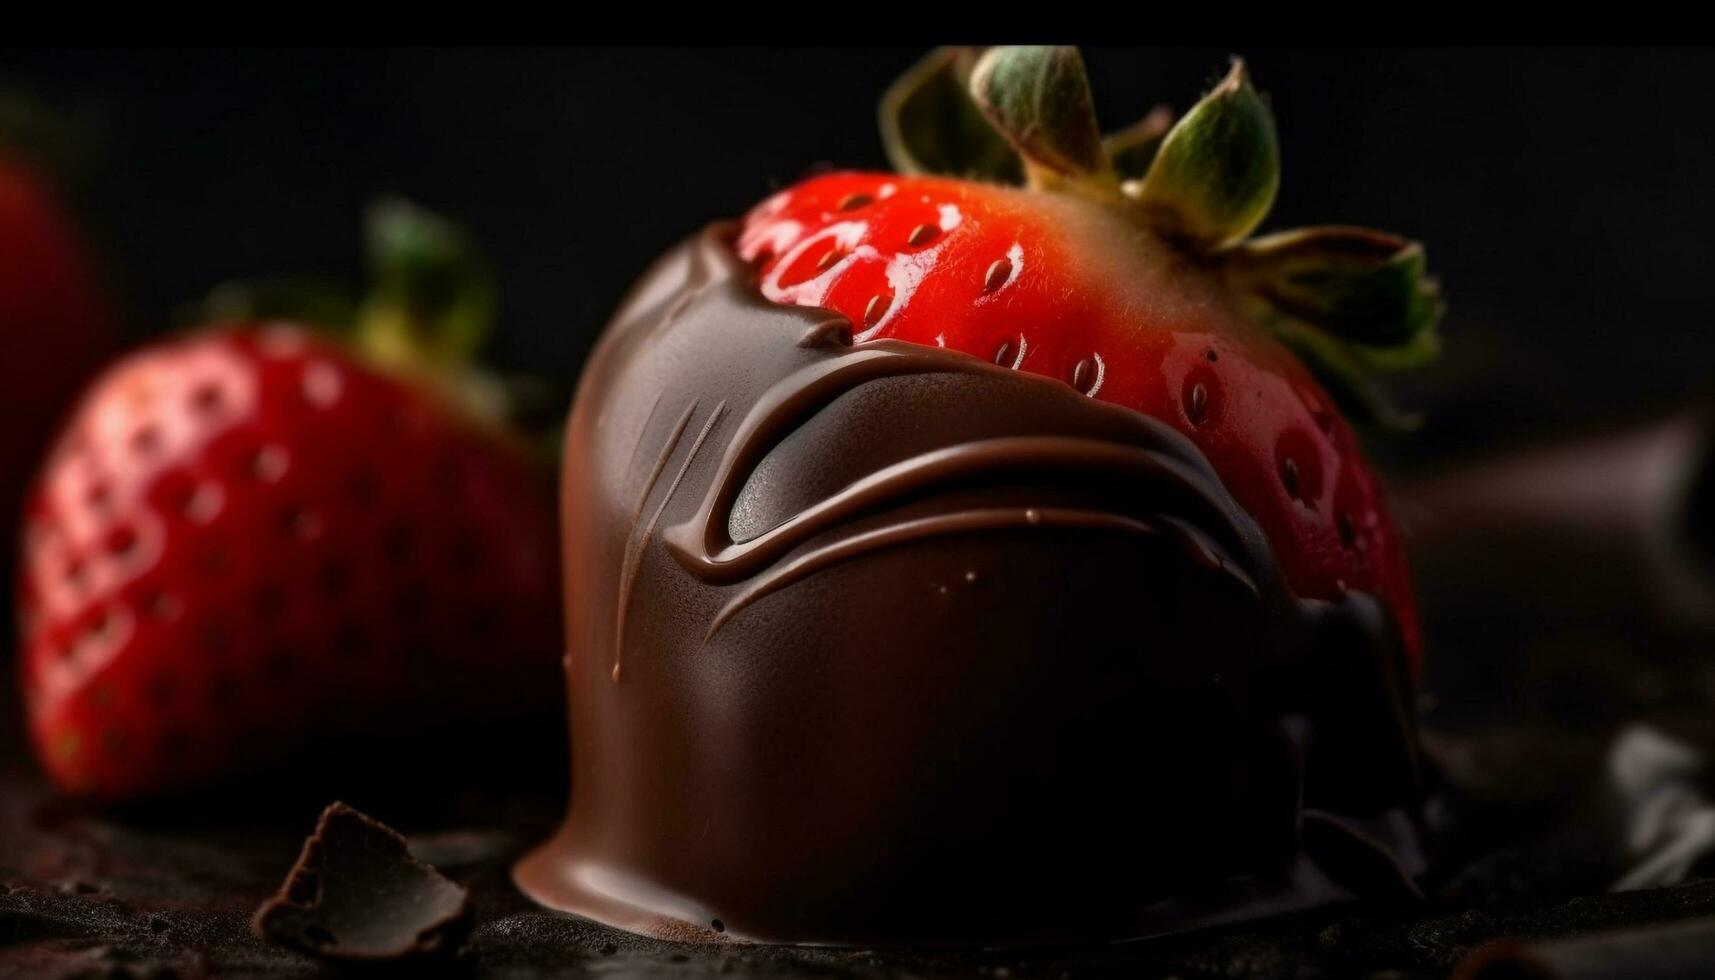 Indulgent chocolate dipped strawberry dessert, a sweet gourmet indulgence generated by AI photo